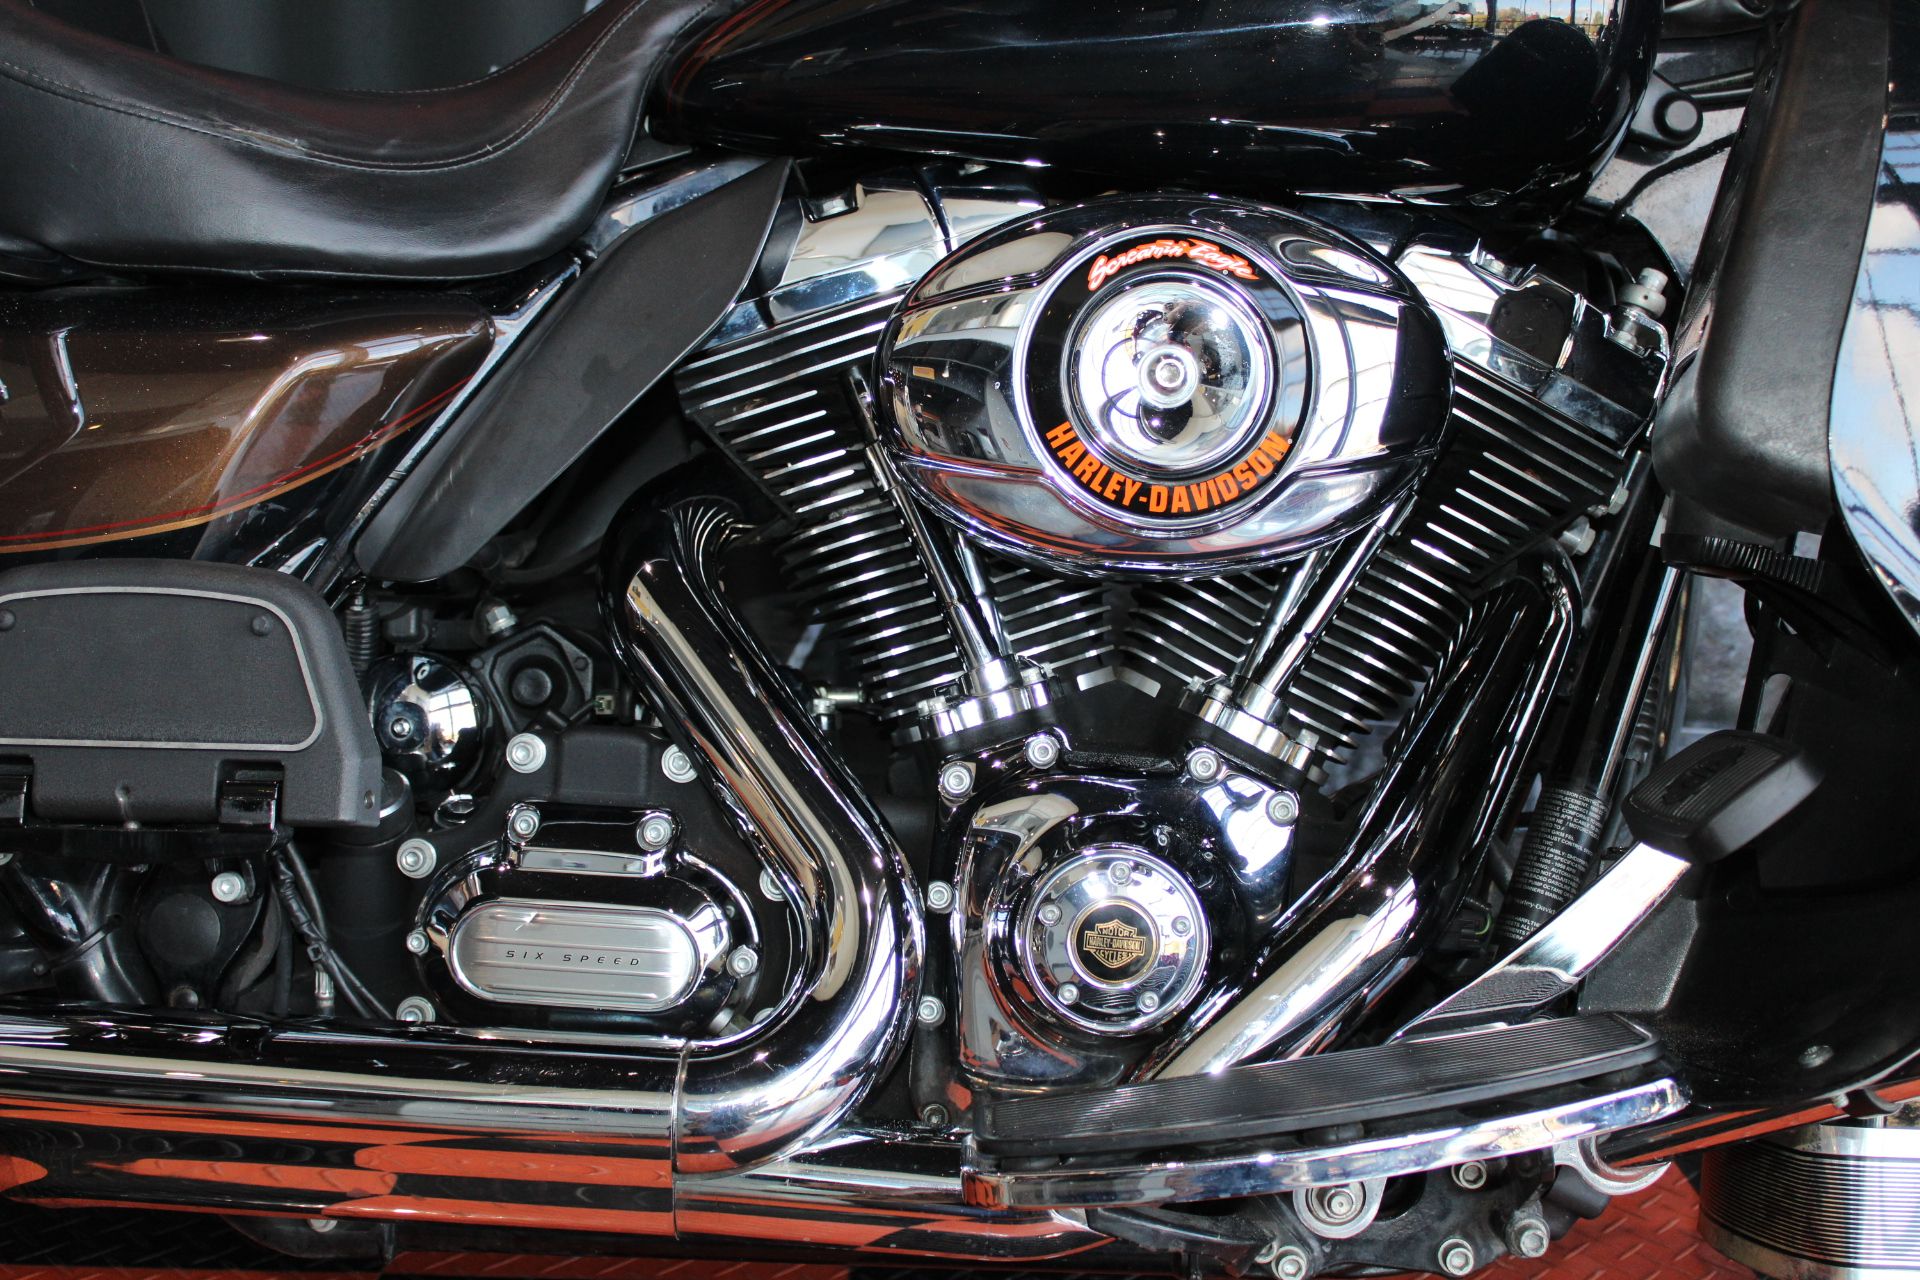 2013 Harley-Davidson Electra Glide® Ultra Limited 110th Anniversary Edition in Shorewood, Illinois - Photo 6